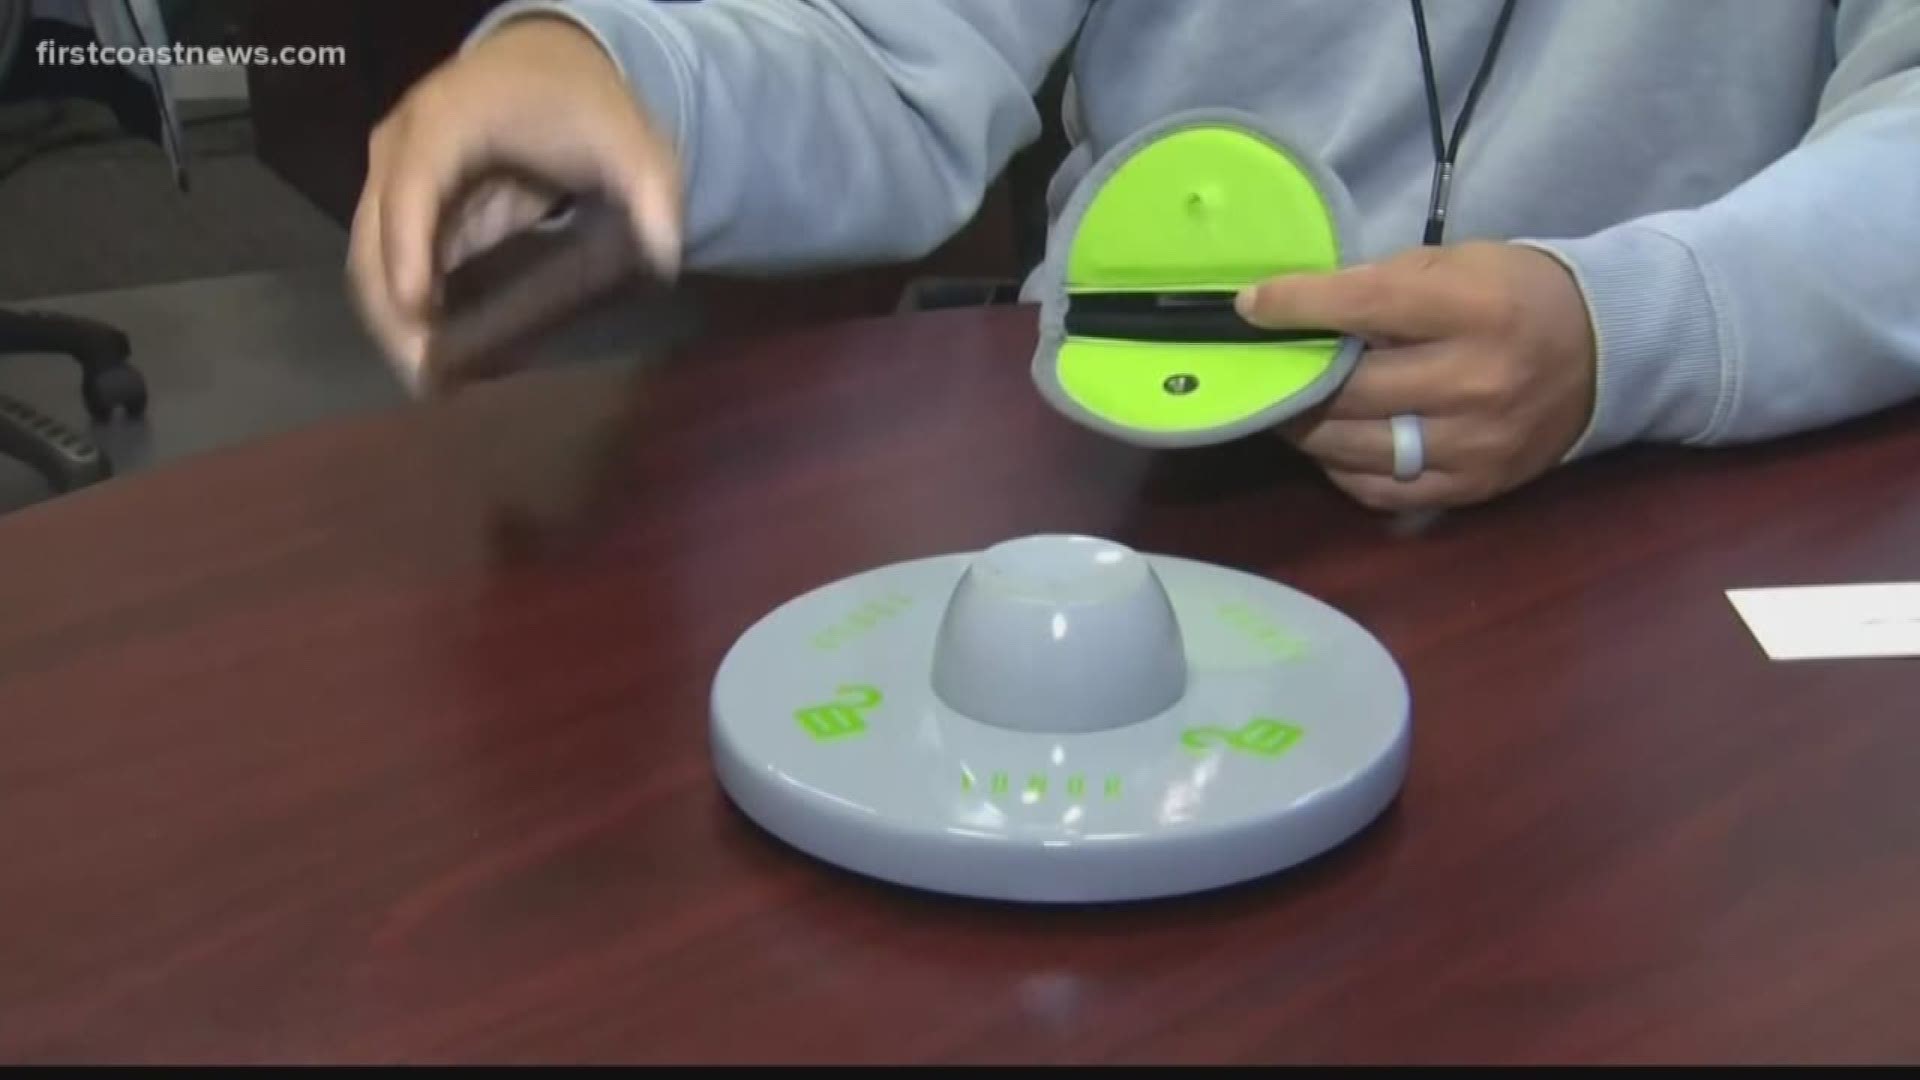 This device hopes to lock phones away for an entire day. Do you think it's a good solution?